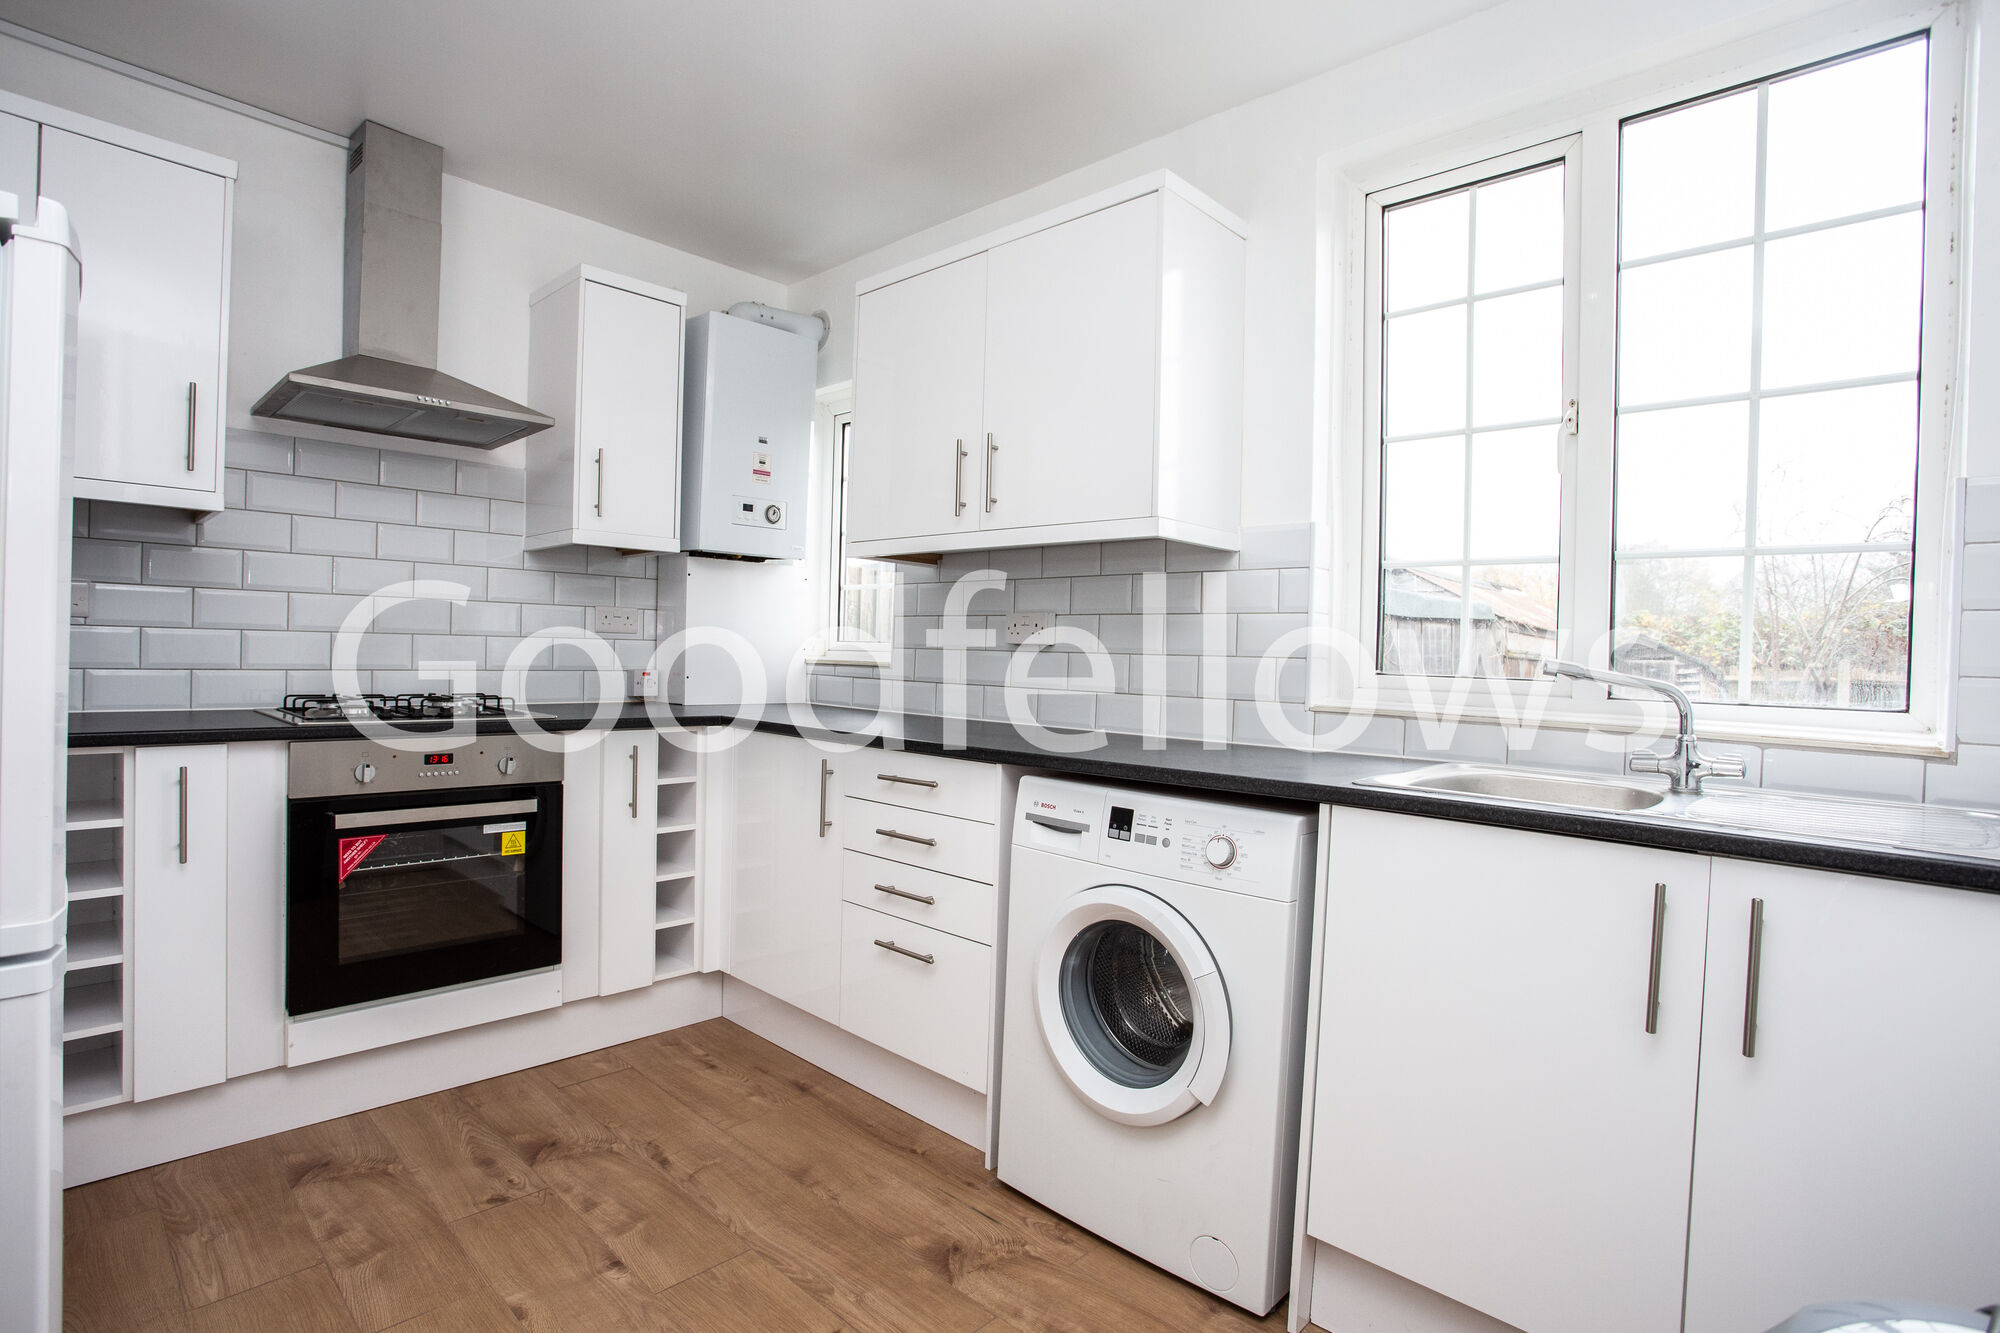 3 bedroom  house to rent, Available now New Close, Colliers Wood, SW19, main image